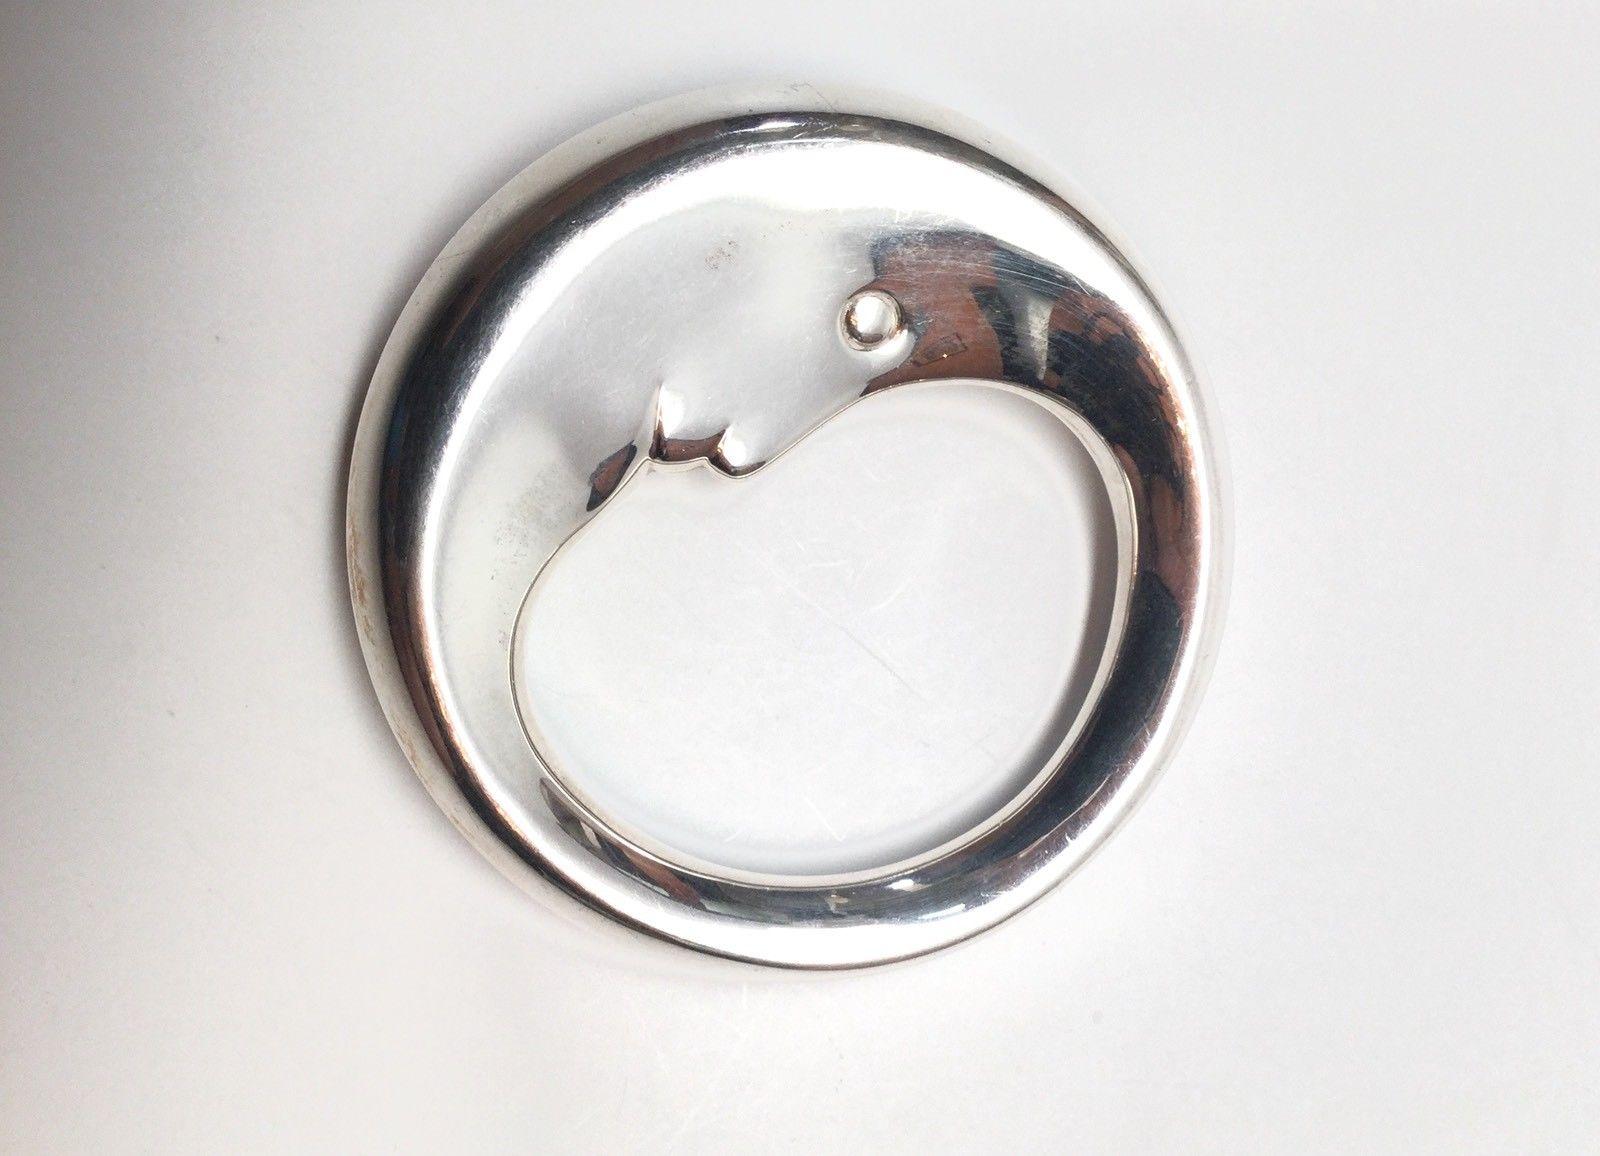 Tiffany & Co. sterling silver man in the moon baby rattle. This is a very special sterling silver man in the moon baby rattle designed by Tiffany & Co. This is a perfect gift for a baby! Measurements: Approximate 2.5 inches in diameter. Approximate